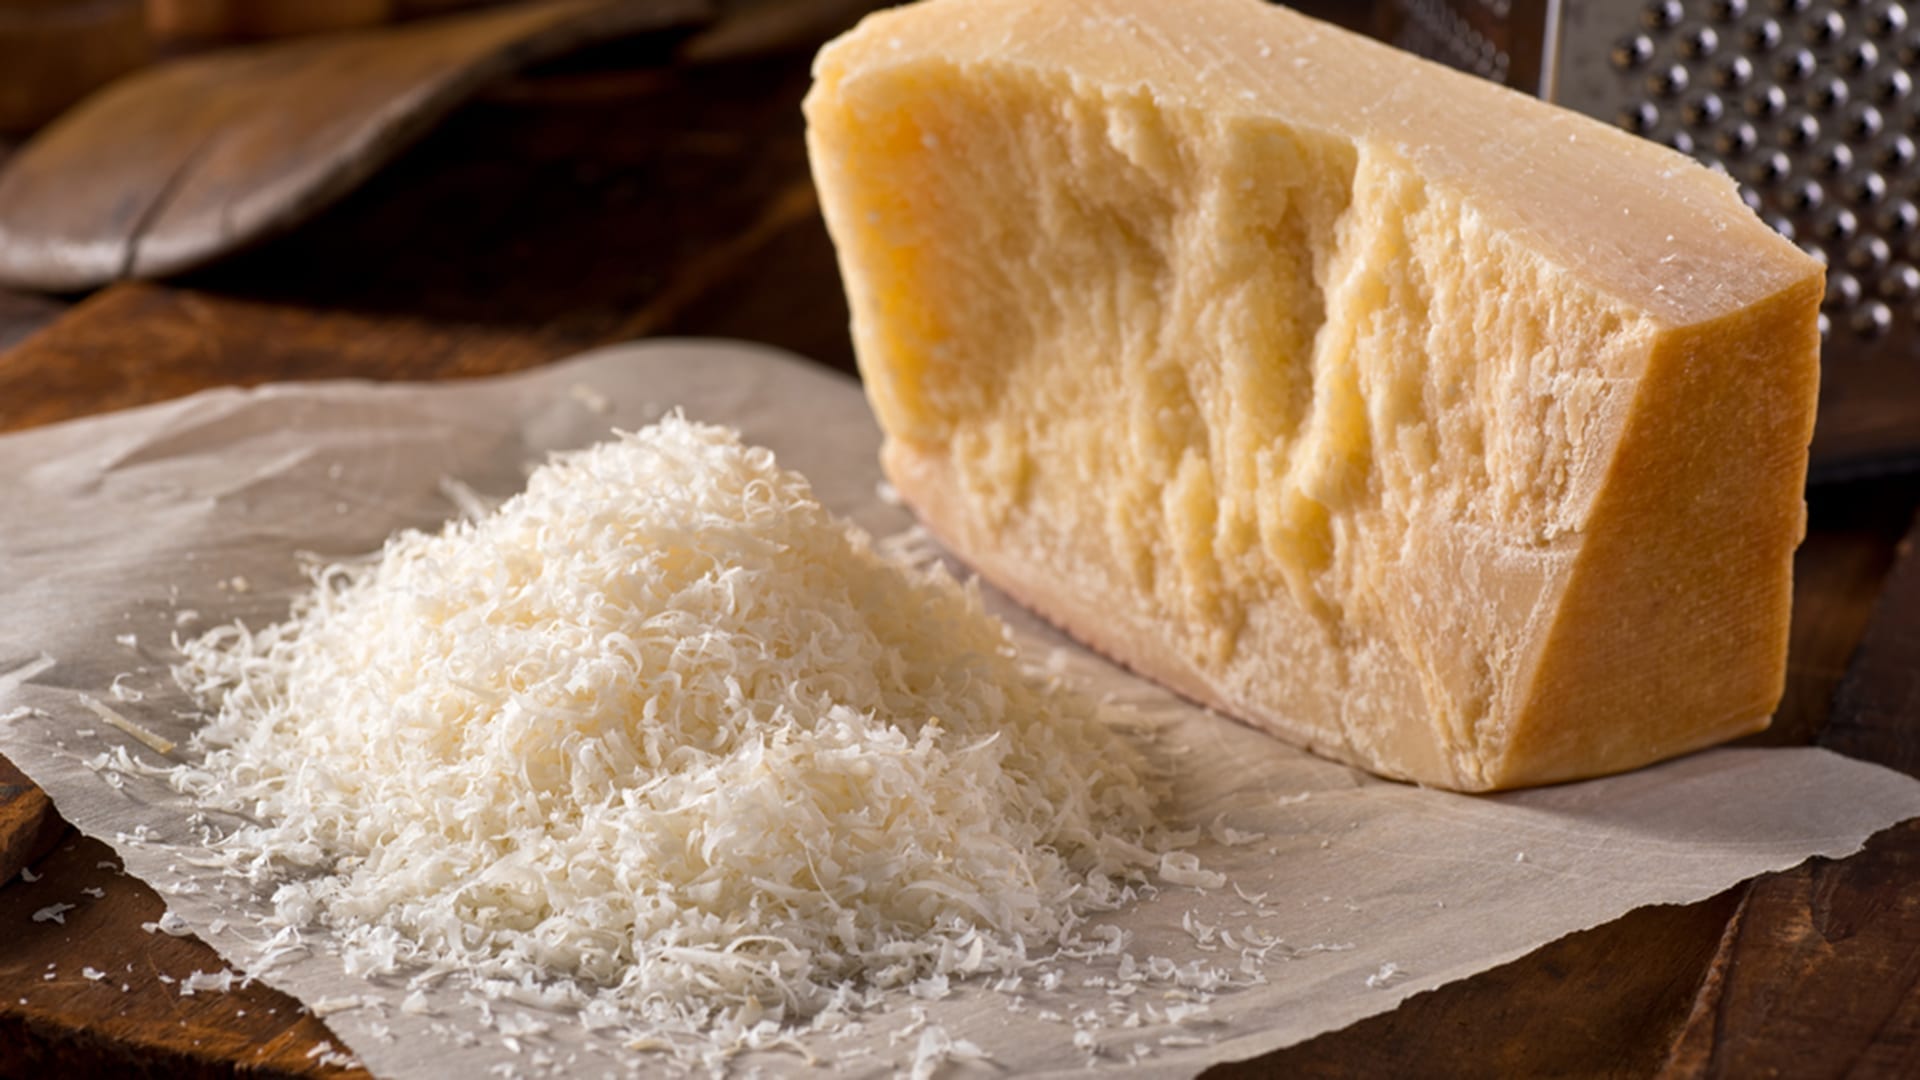 10 Cheesy Facts About the Parmesan Cheese That Came From Italy 3